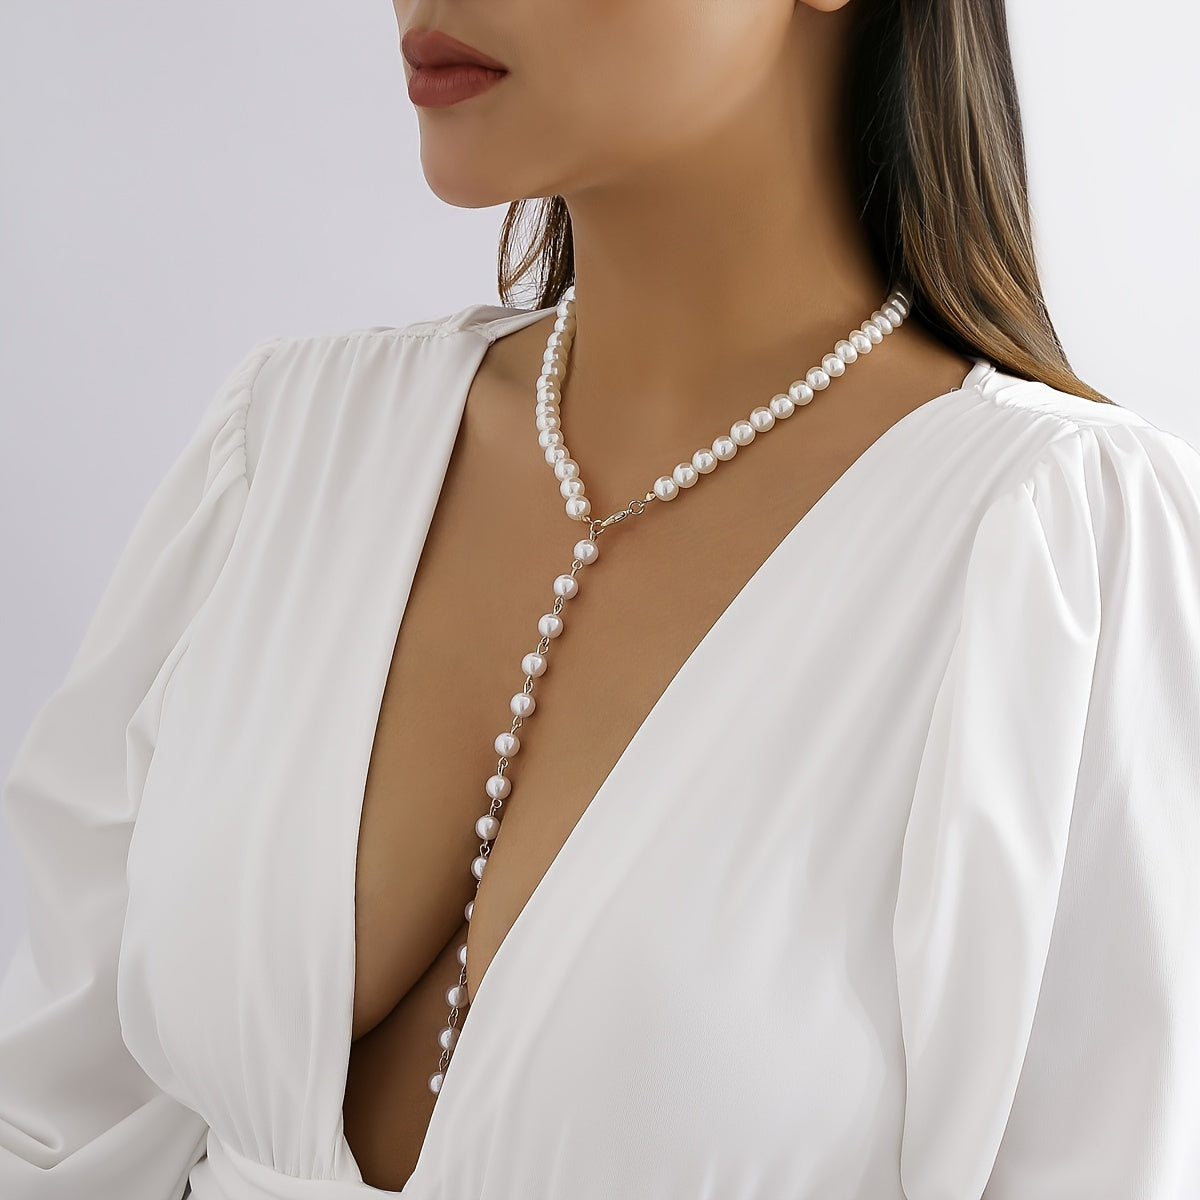 Gorgeous Y-Shaped Pearl Tassel Necklace - Perfect for Women & Girls with Simple Stylish Charm!